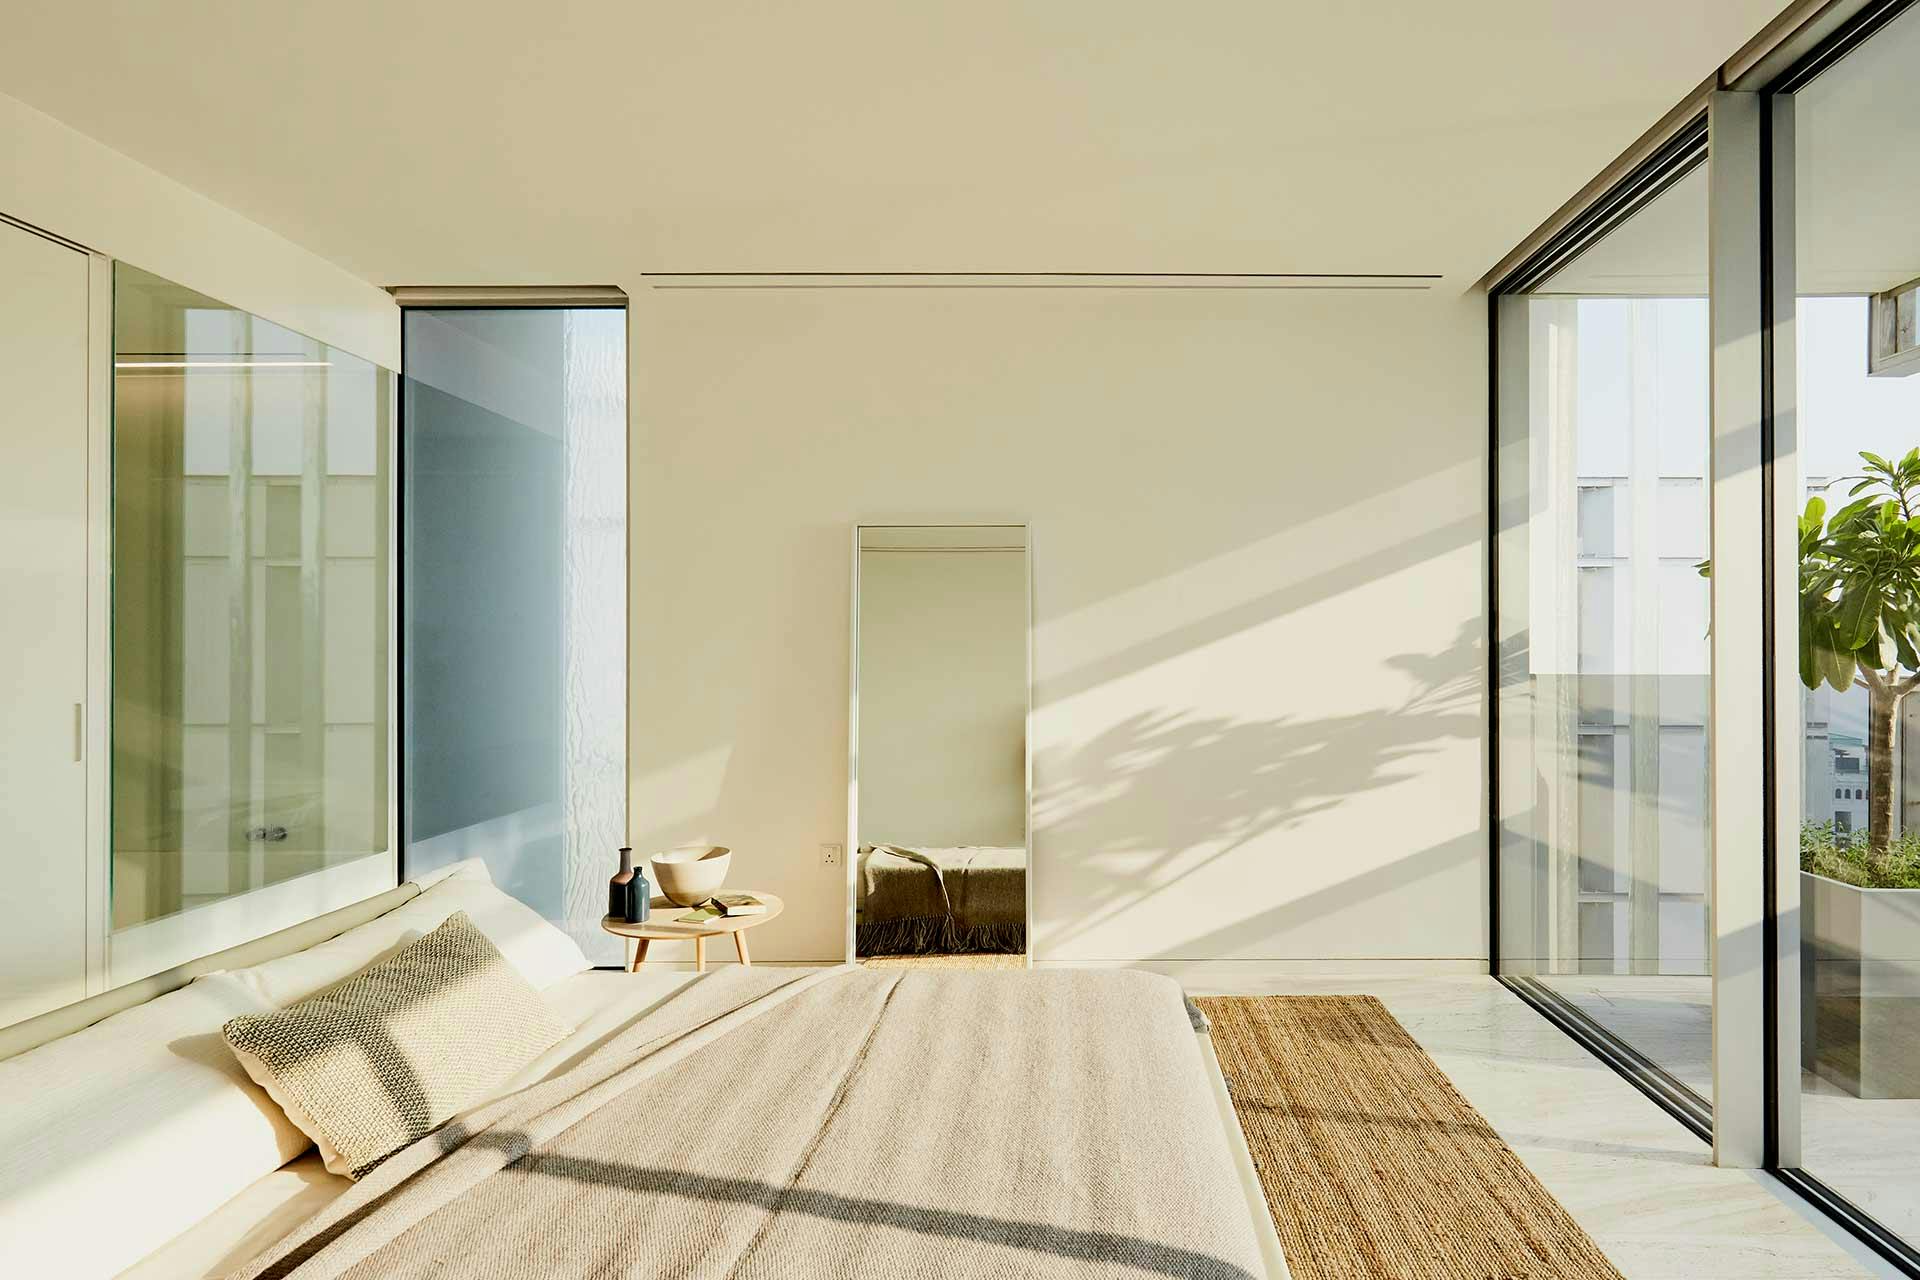 Sunny bedroom with a wireless dimming system and motorised blinds